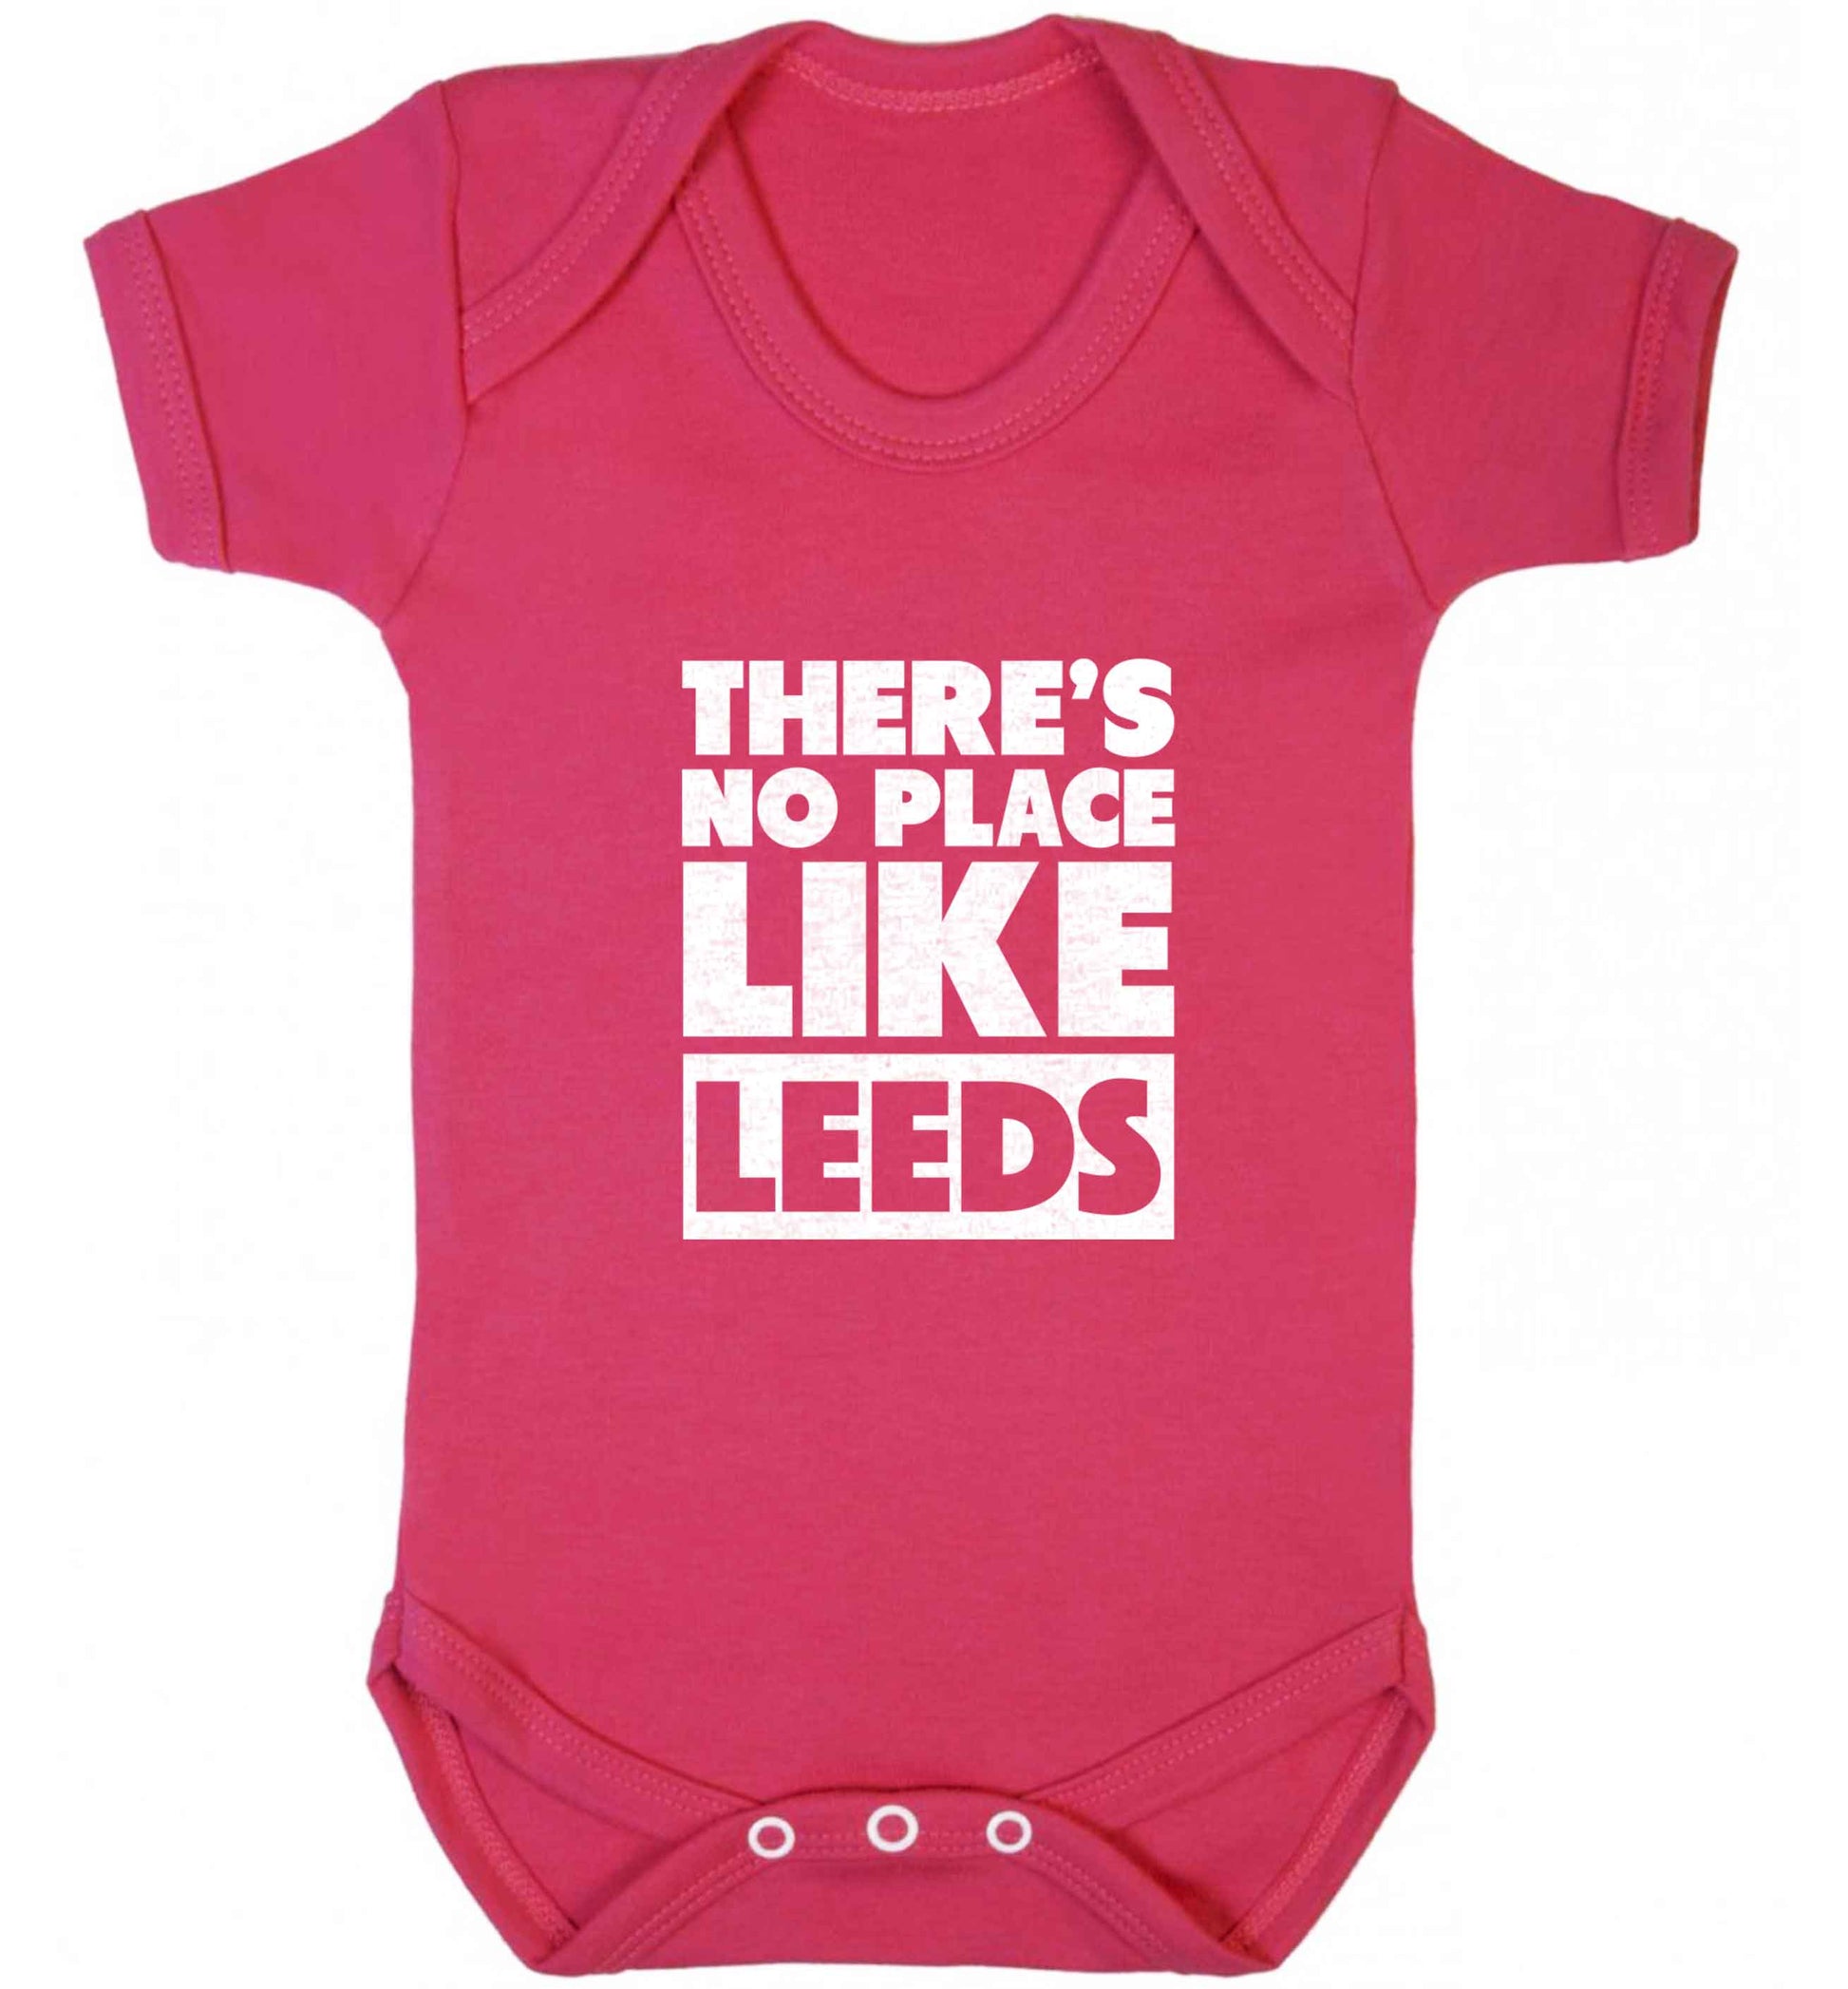 There's no place like Leeds baby vest dark pink 18-24 months